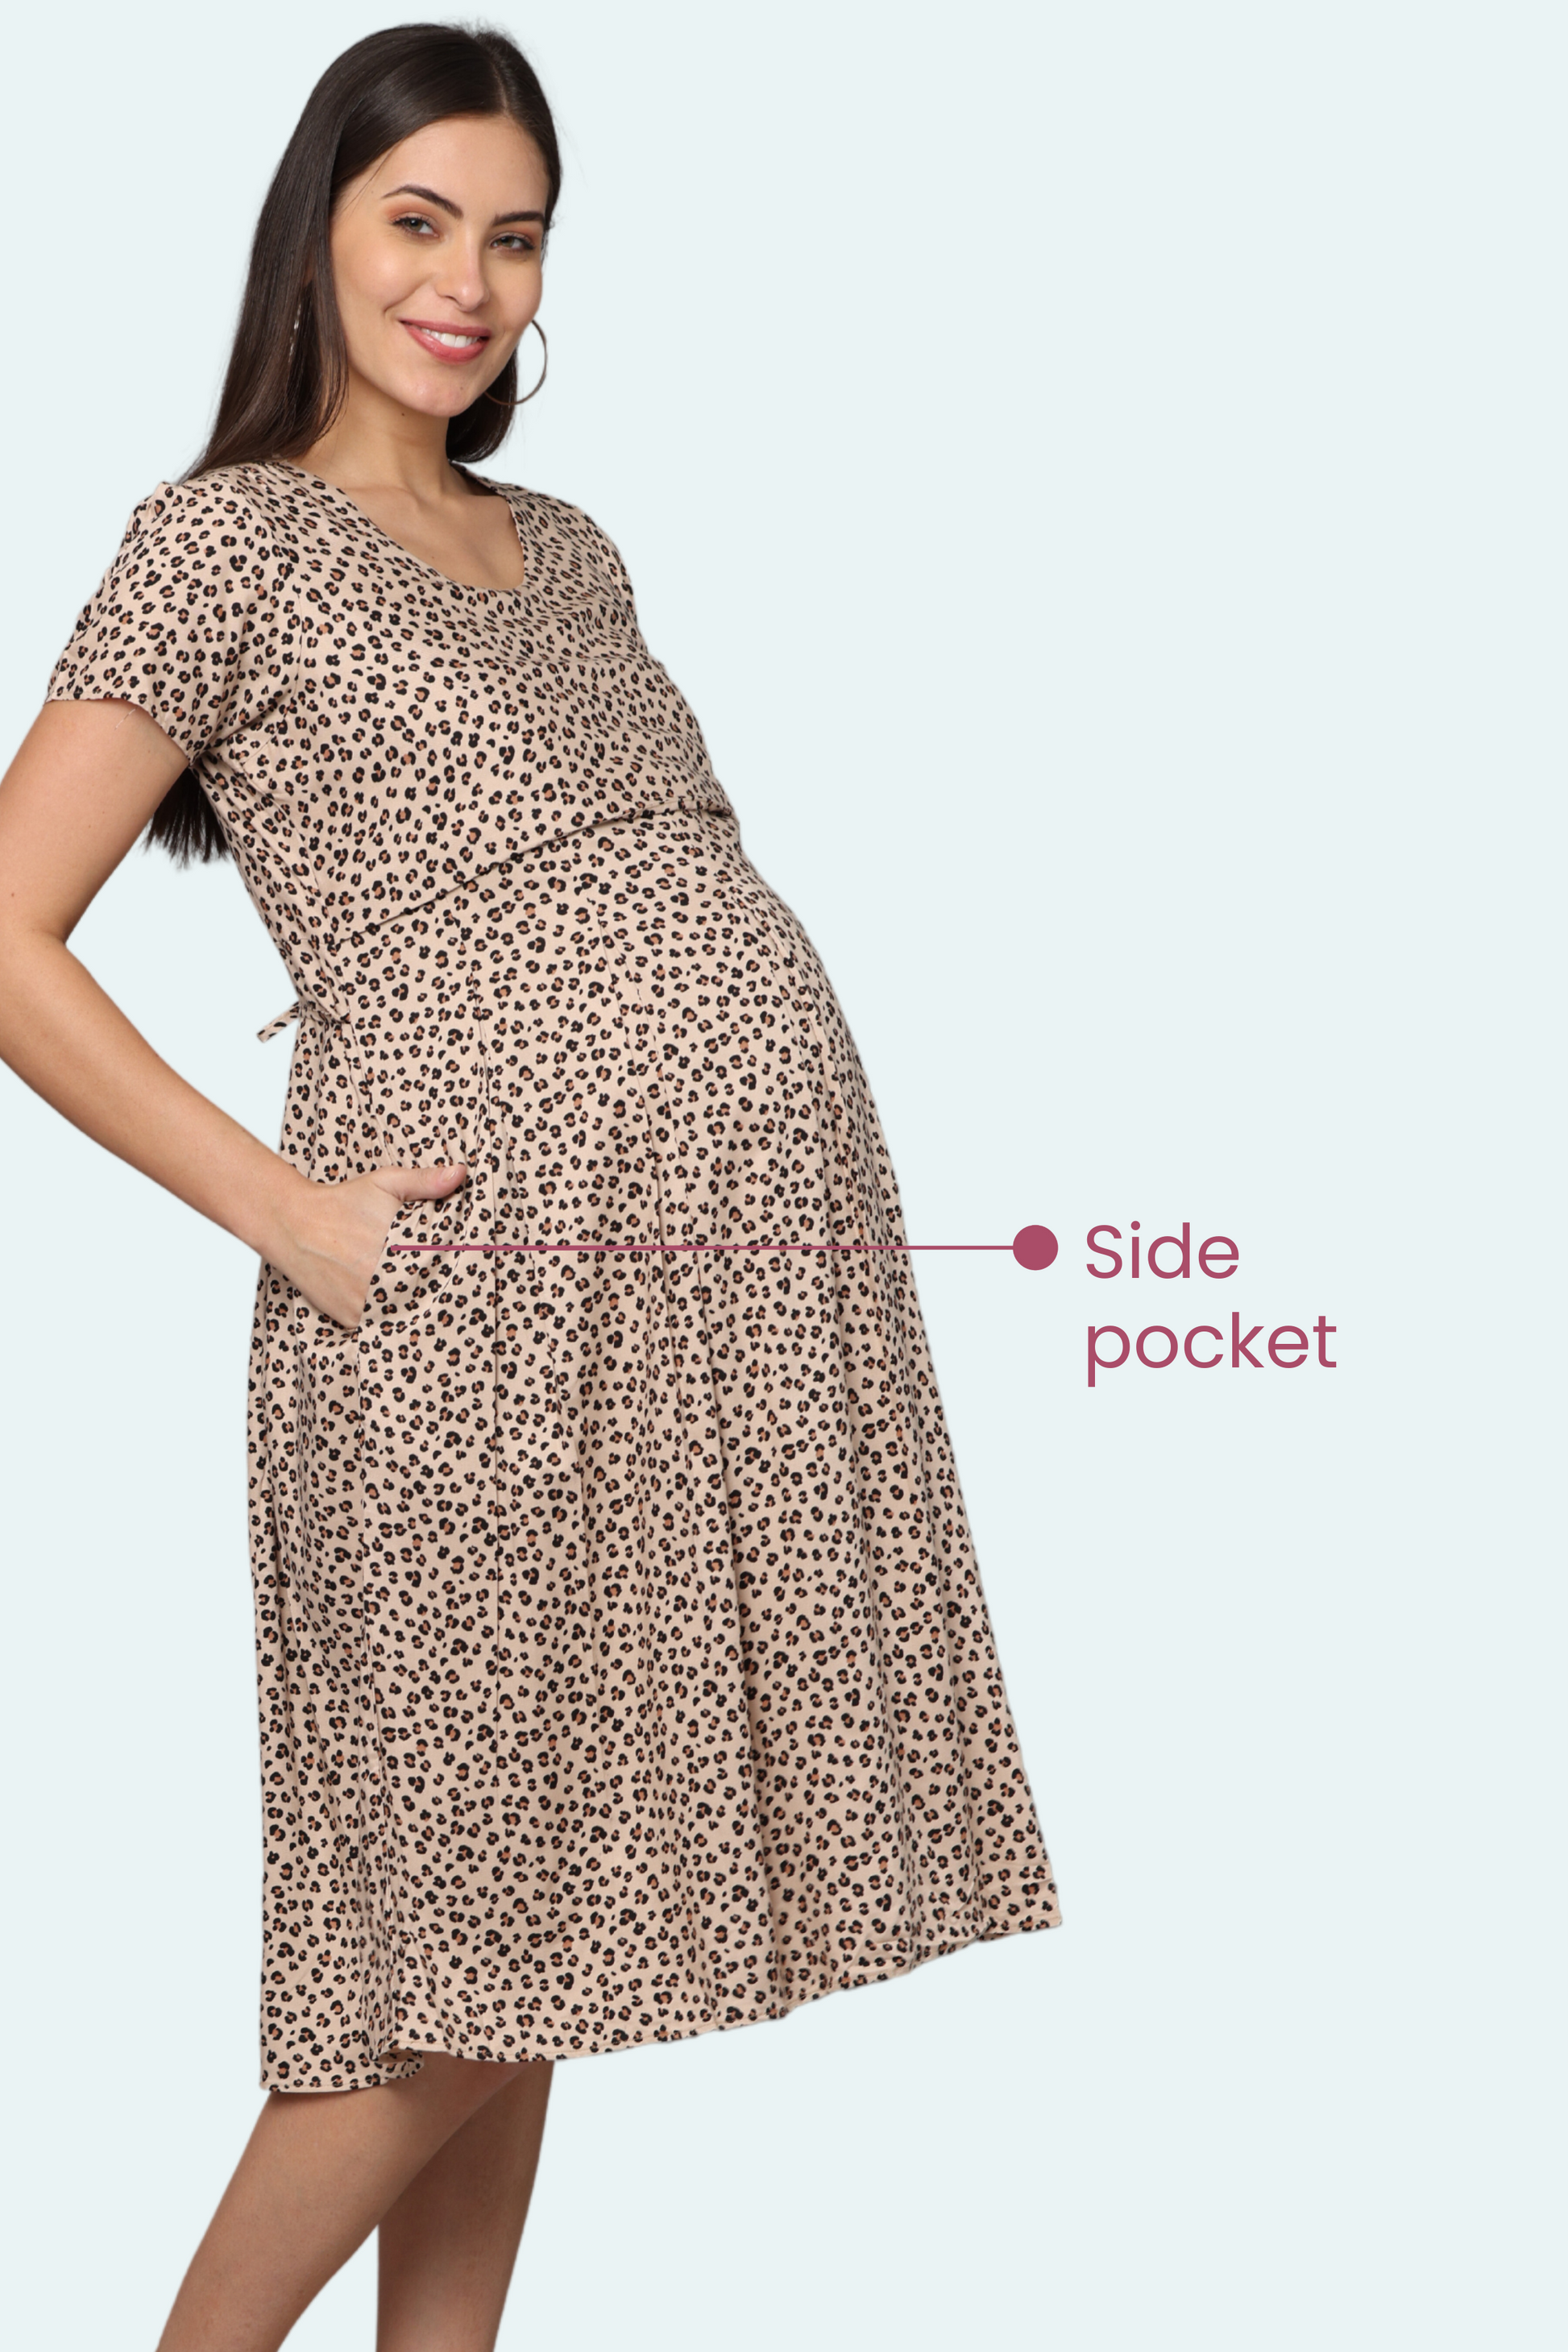 Maternity Dress With Side pocket